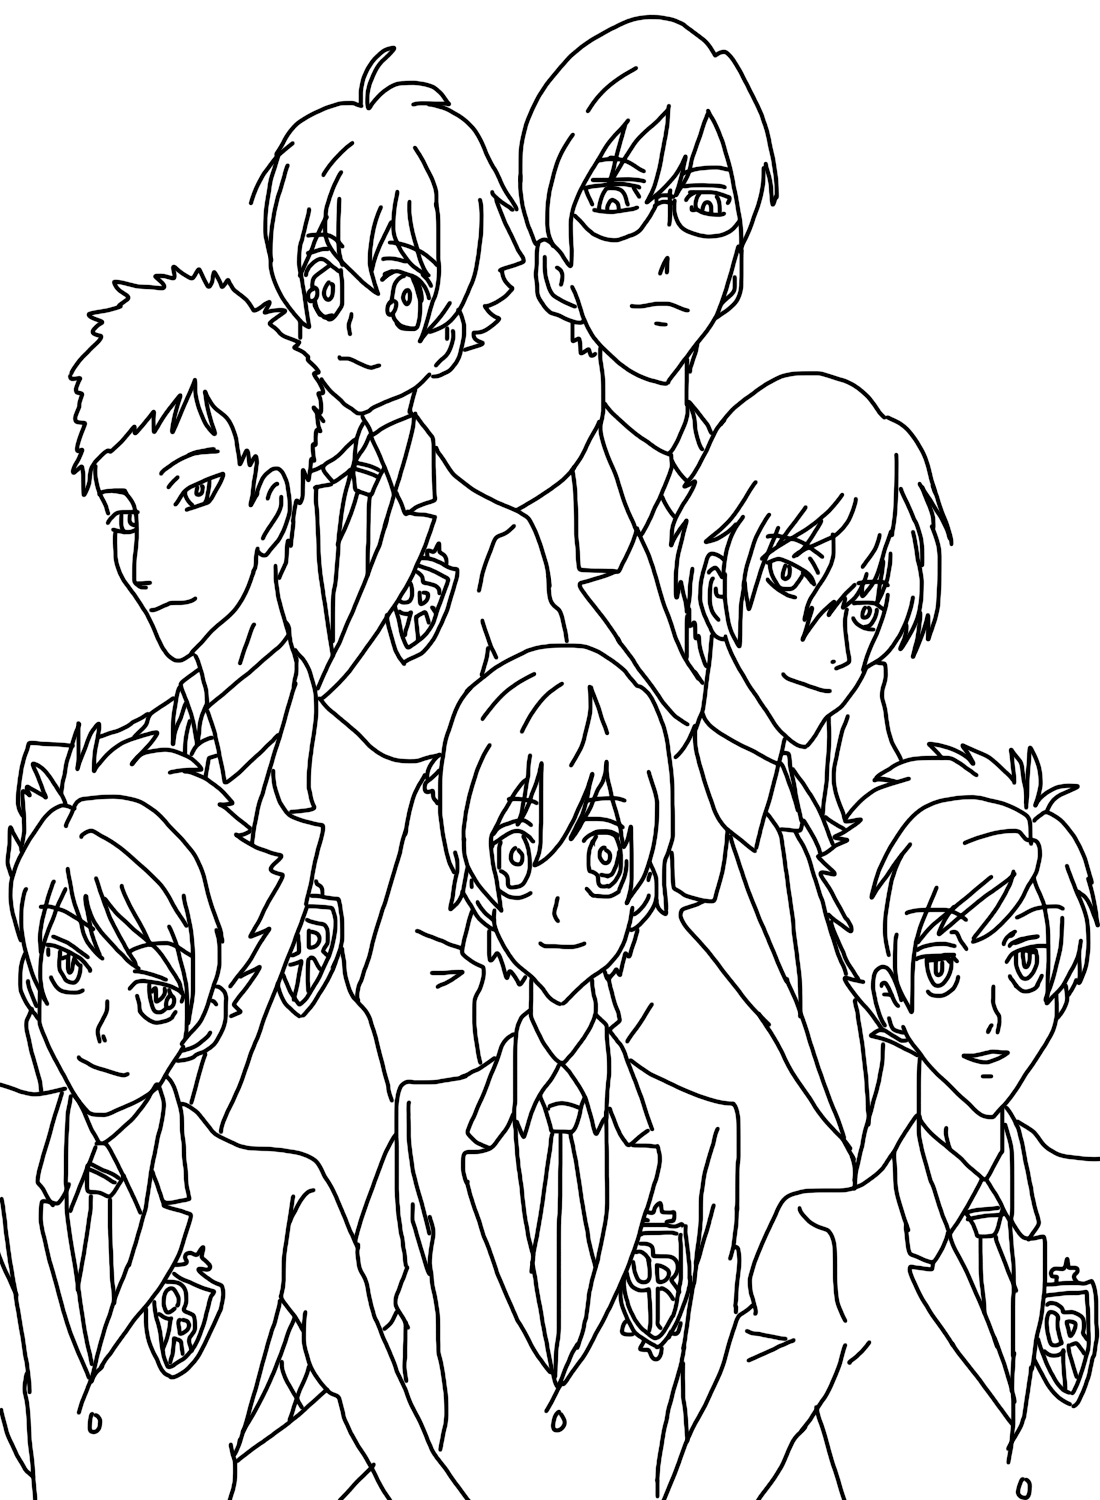 Ouran High School Host Club Coloring Page